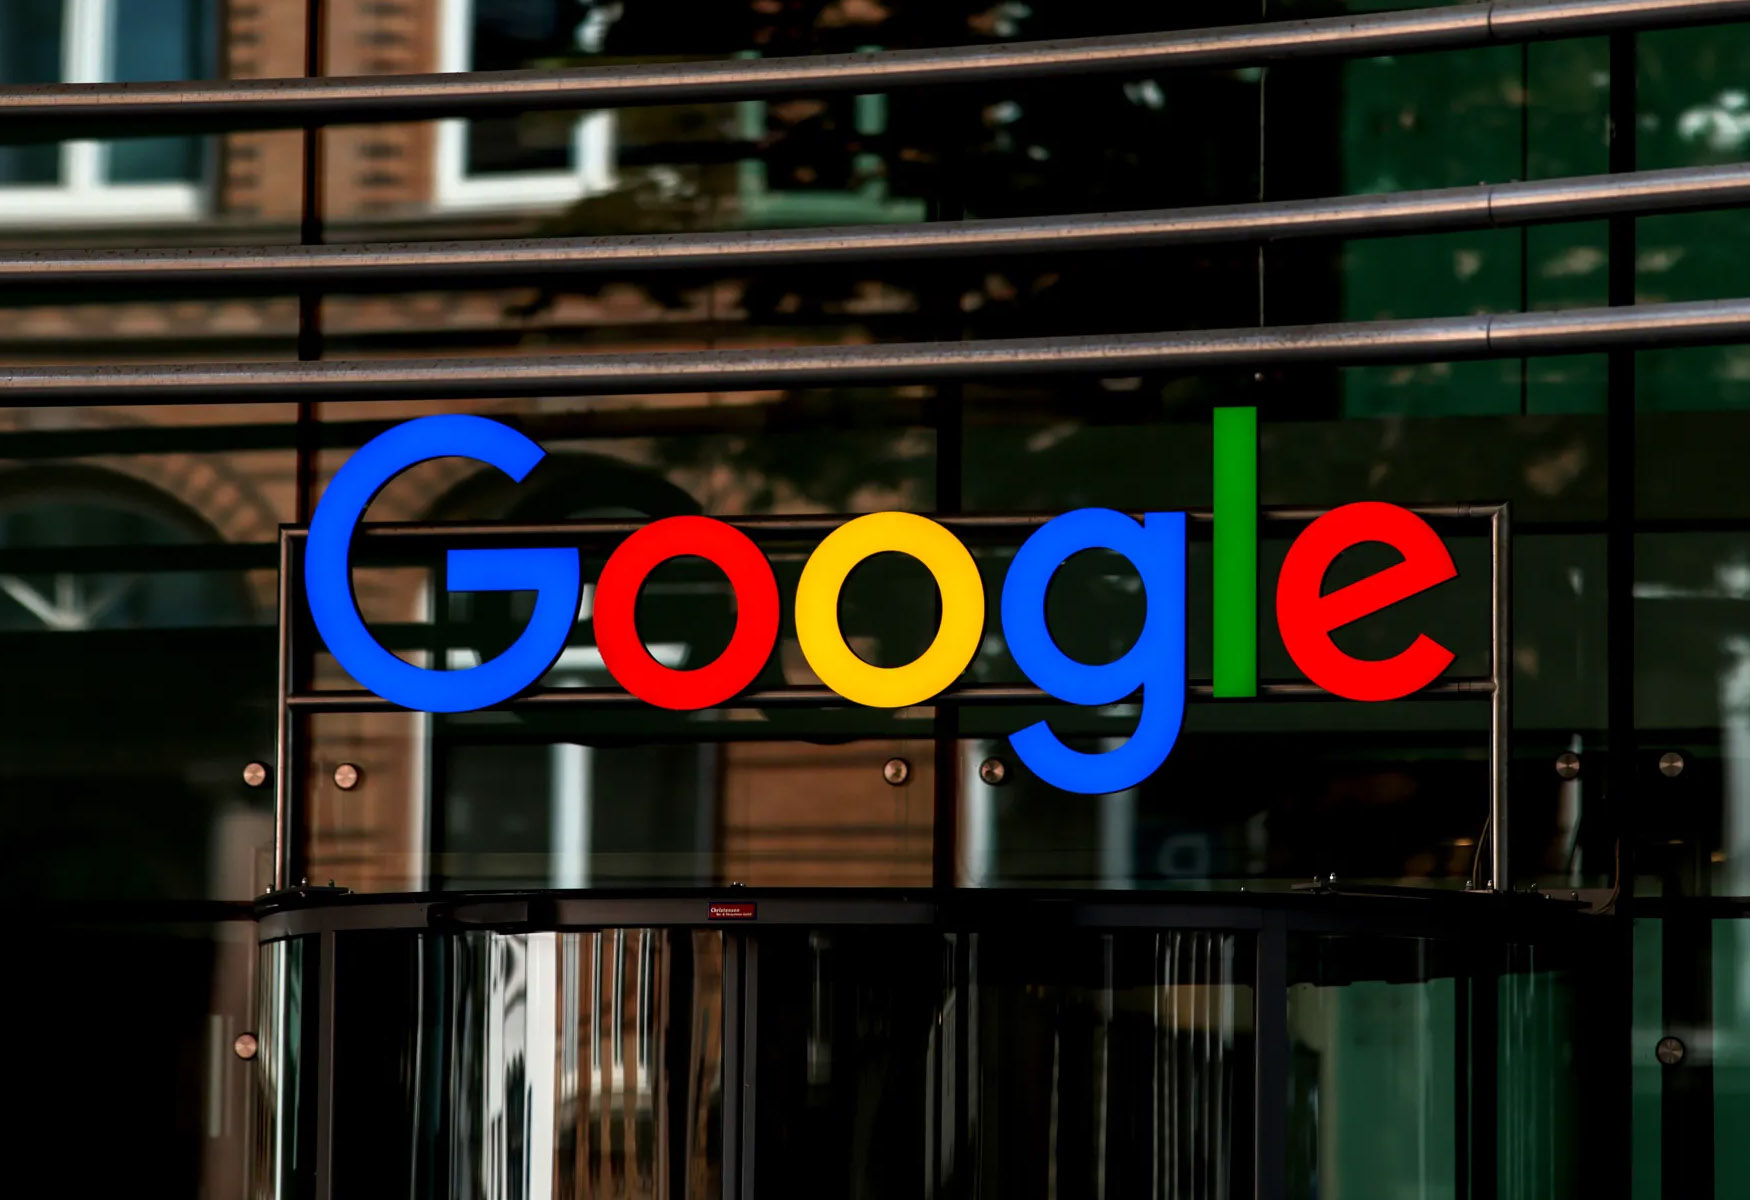 Google’s Move To End Geofence Warrants And Its Impact On Surveillance Practices